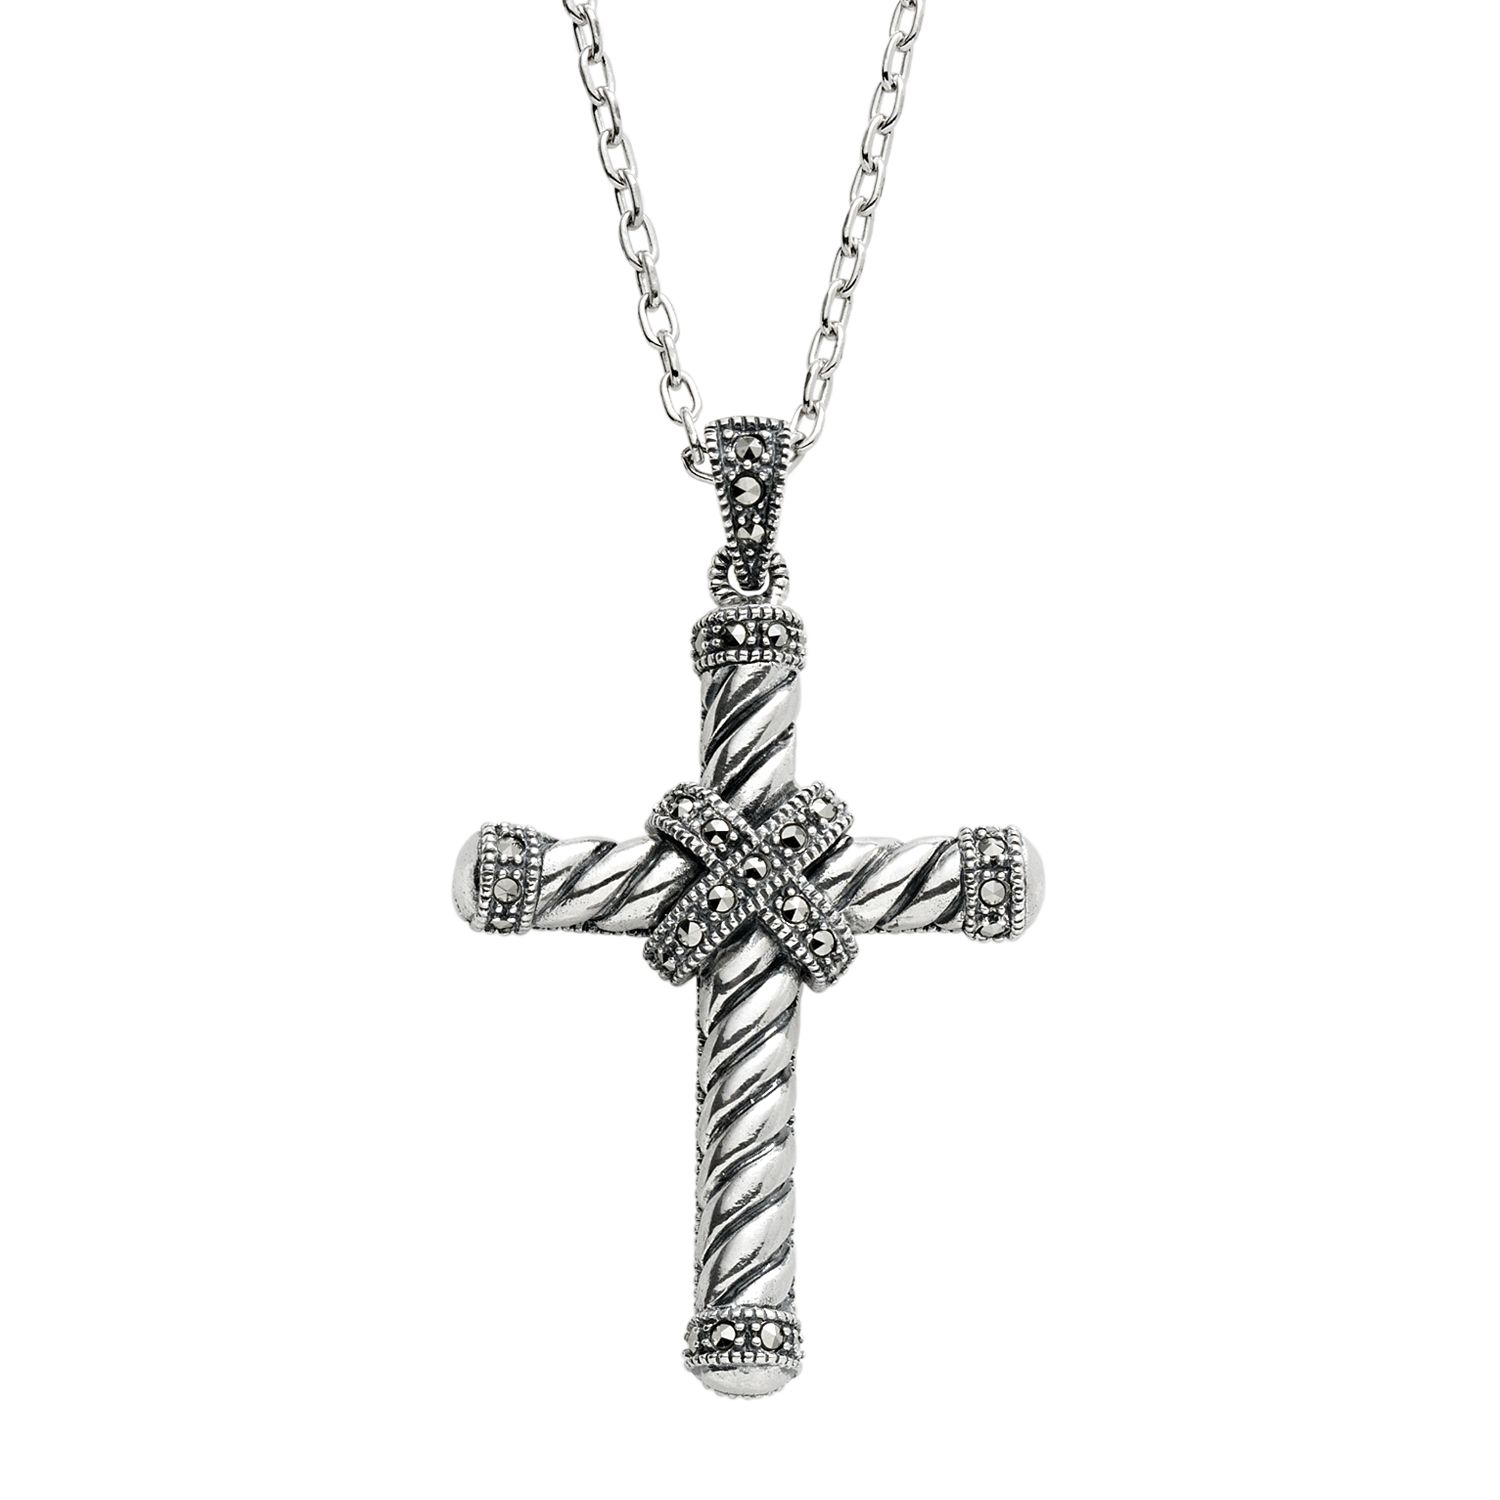 Image for Lavish by TJM Sterling Silver Cross Pendant Necklace at Kohl's.